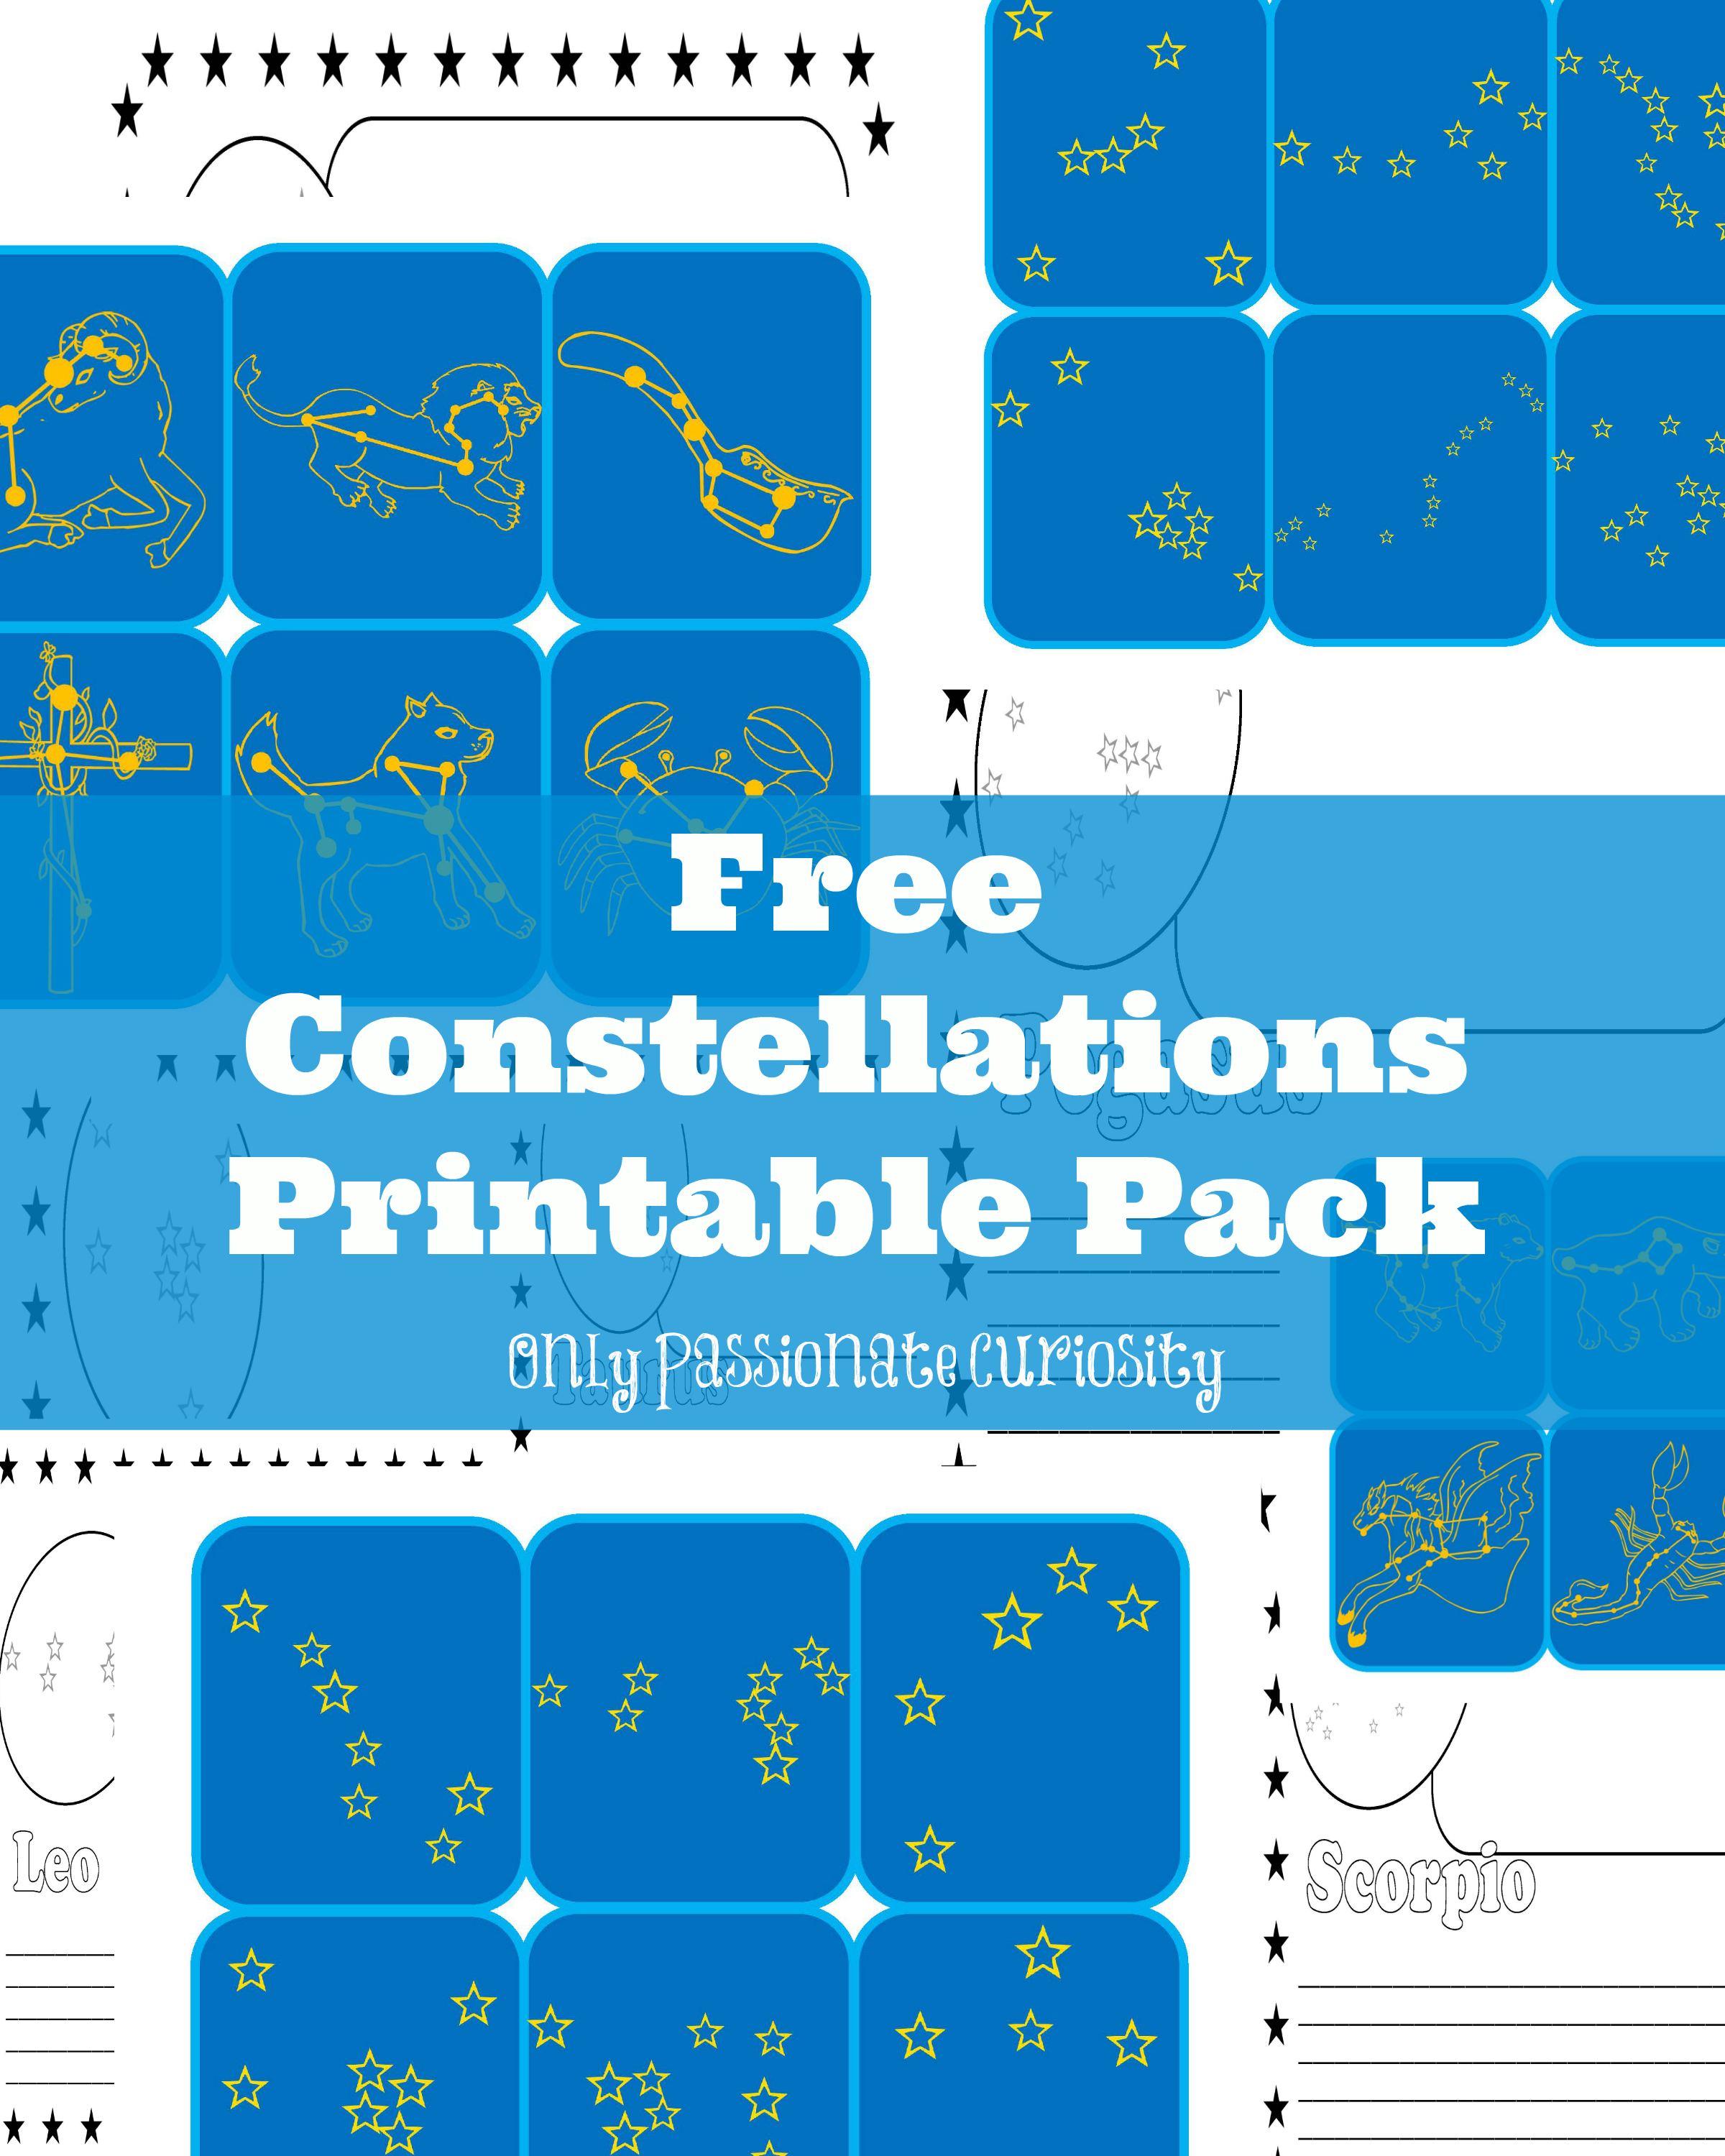 constellations-printable-pack-only-passionate-curiosity